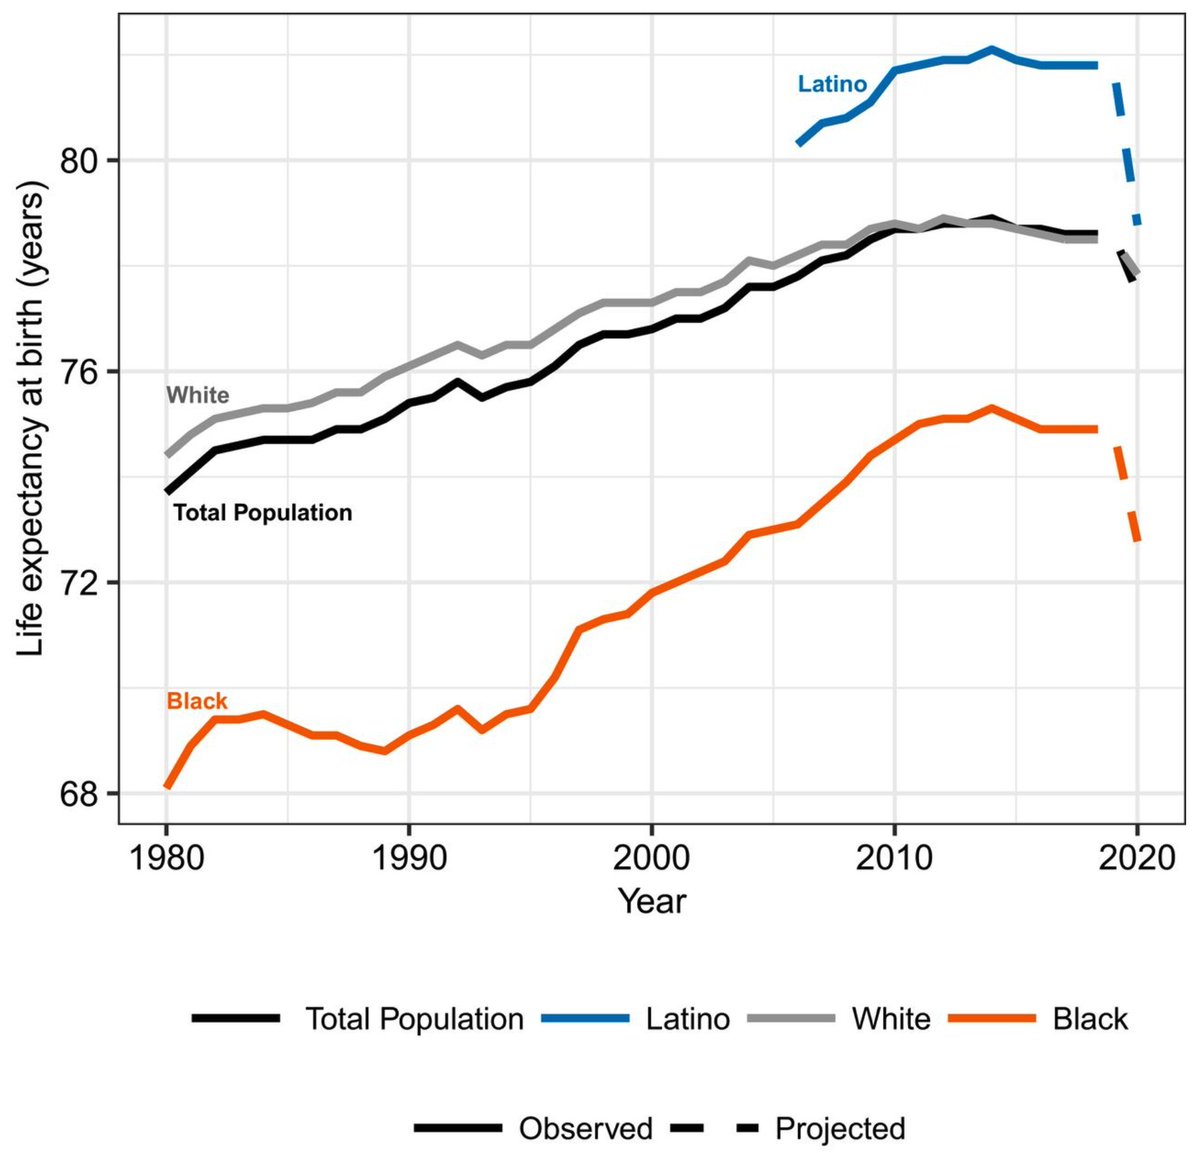 Horrifying new projection: COVID-19 will reduce US life expectancy by 1.1 years, with reductions for Black and Latinx populations of 3 to 4 times that, reversing more than 10 years of progress closing the Black−White gap in life expectancy. 6/  http://bit.ly/35L9JTB 